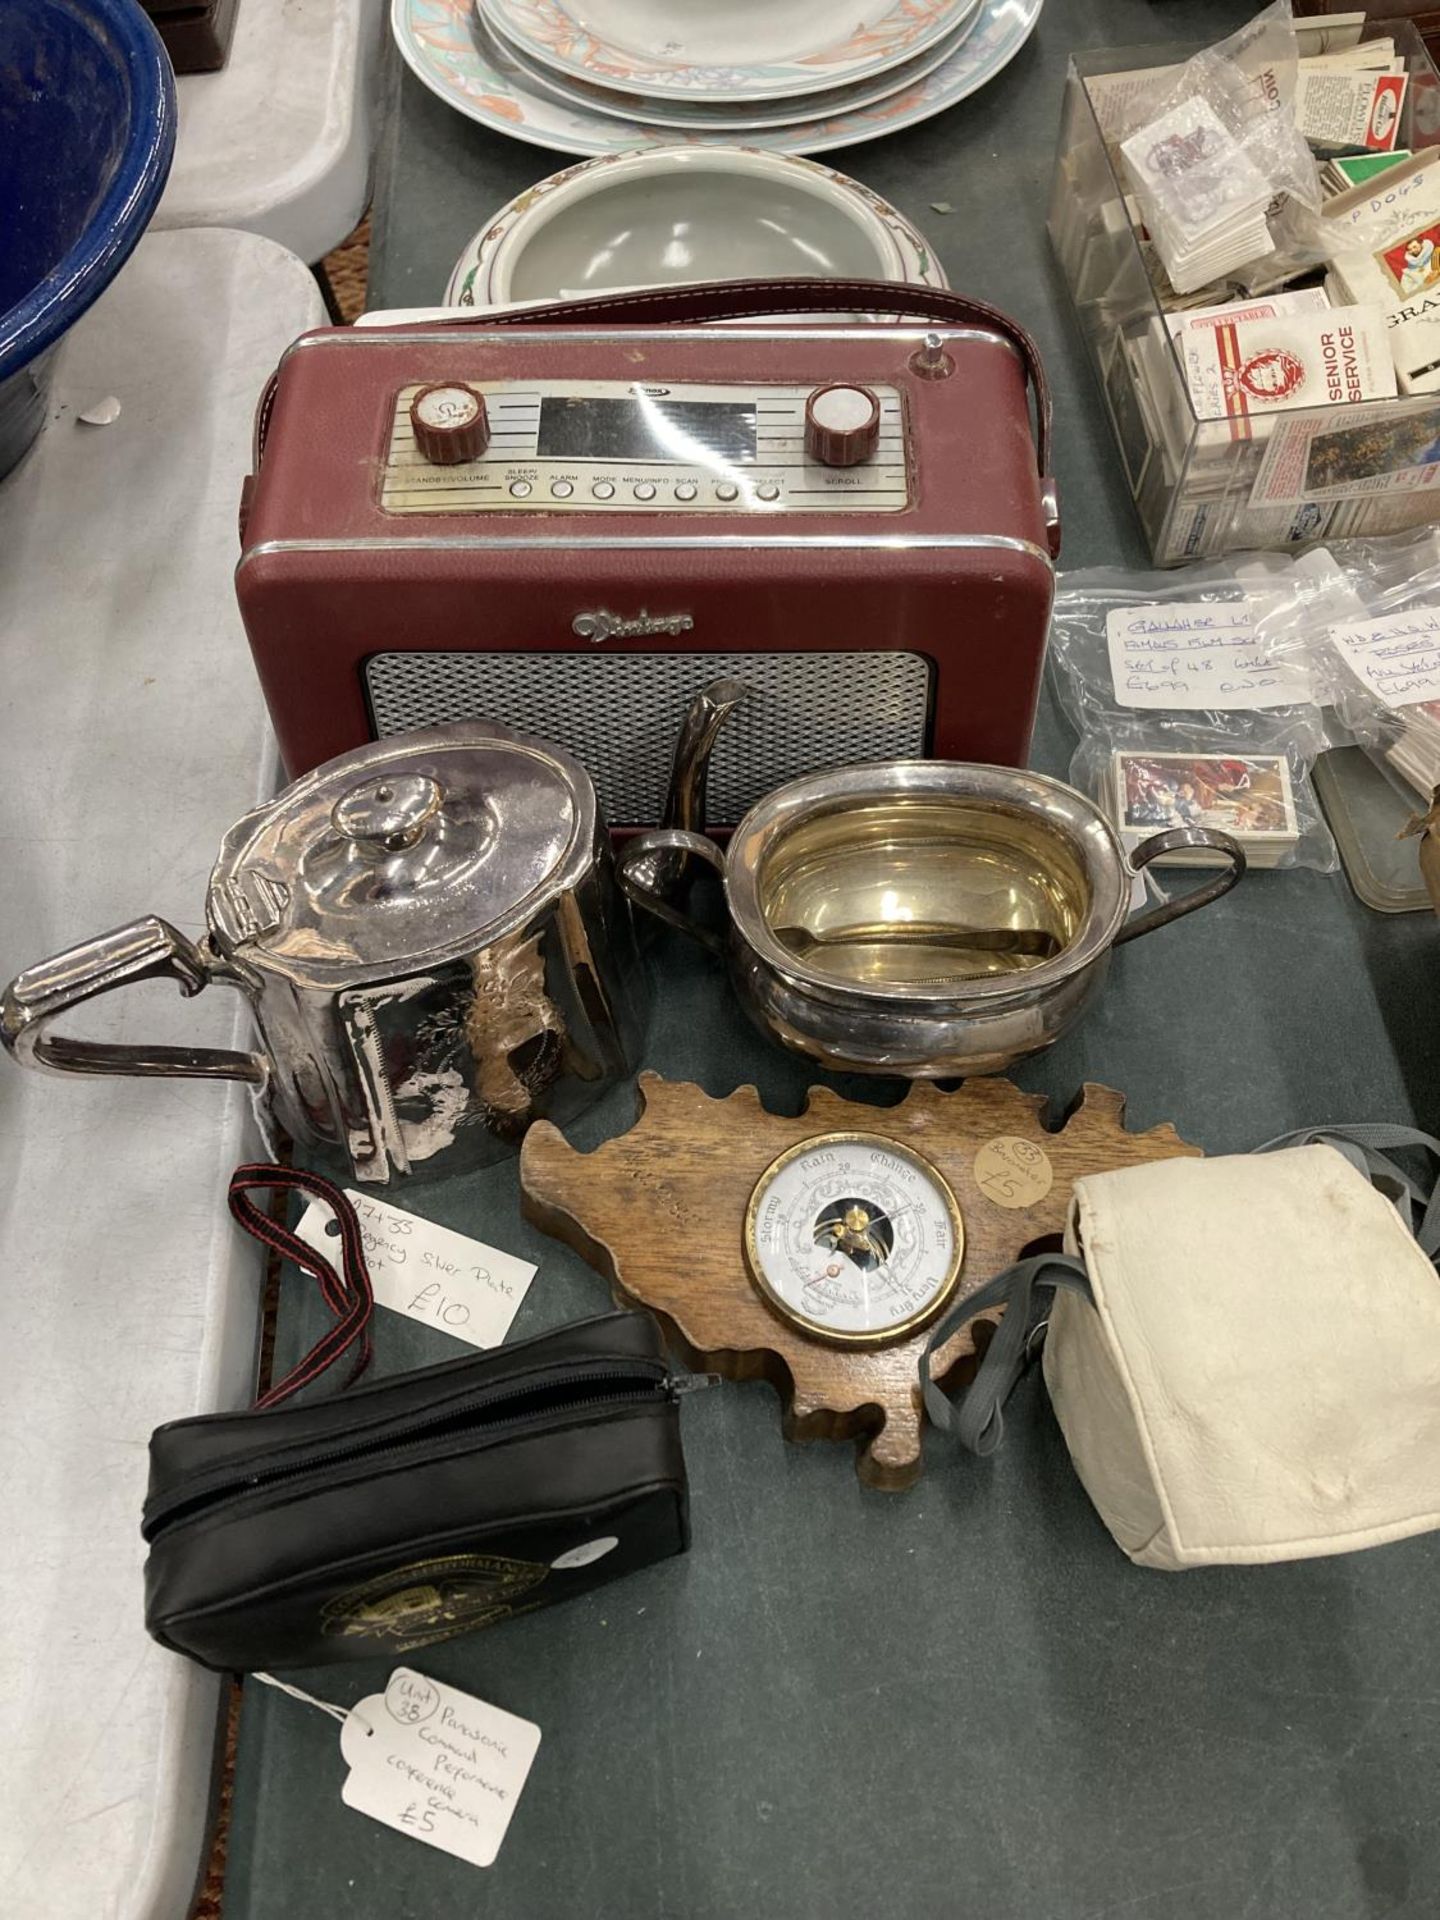 A MIXED LOT TO INCLUDE A VINTAGE RADIO, SILVER PLATE TEAPOT AND SUGAR BOWL, KODAK "BROWNIE" VECTA